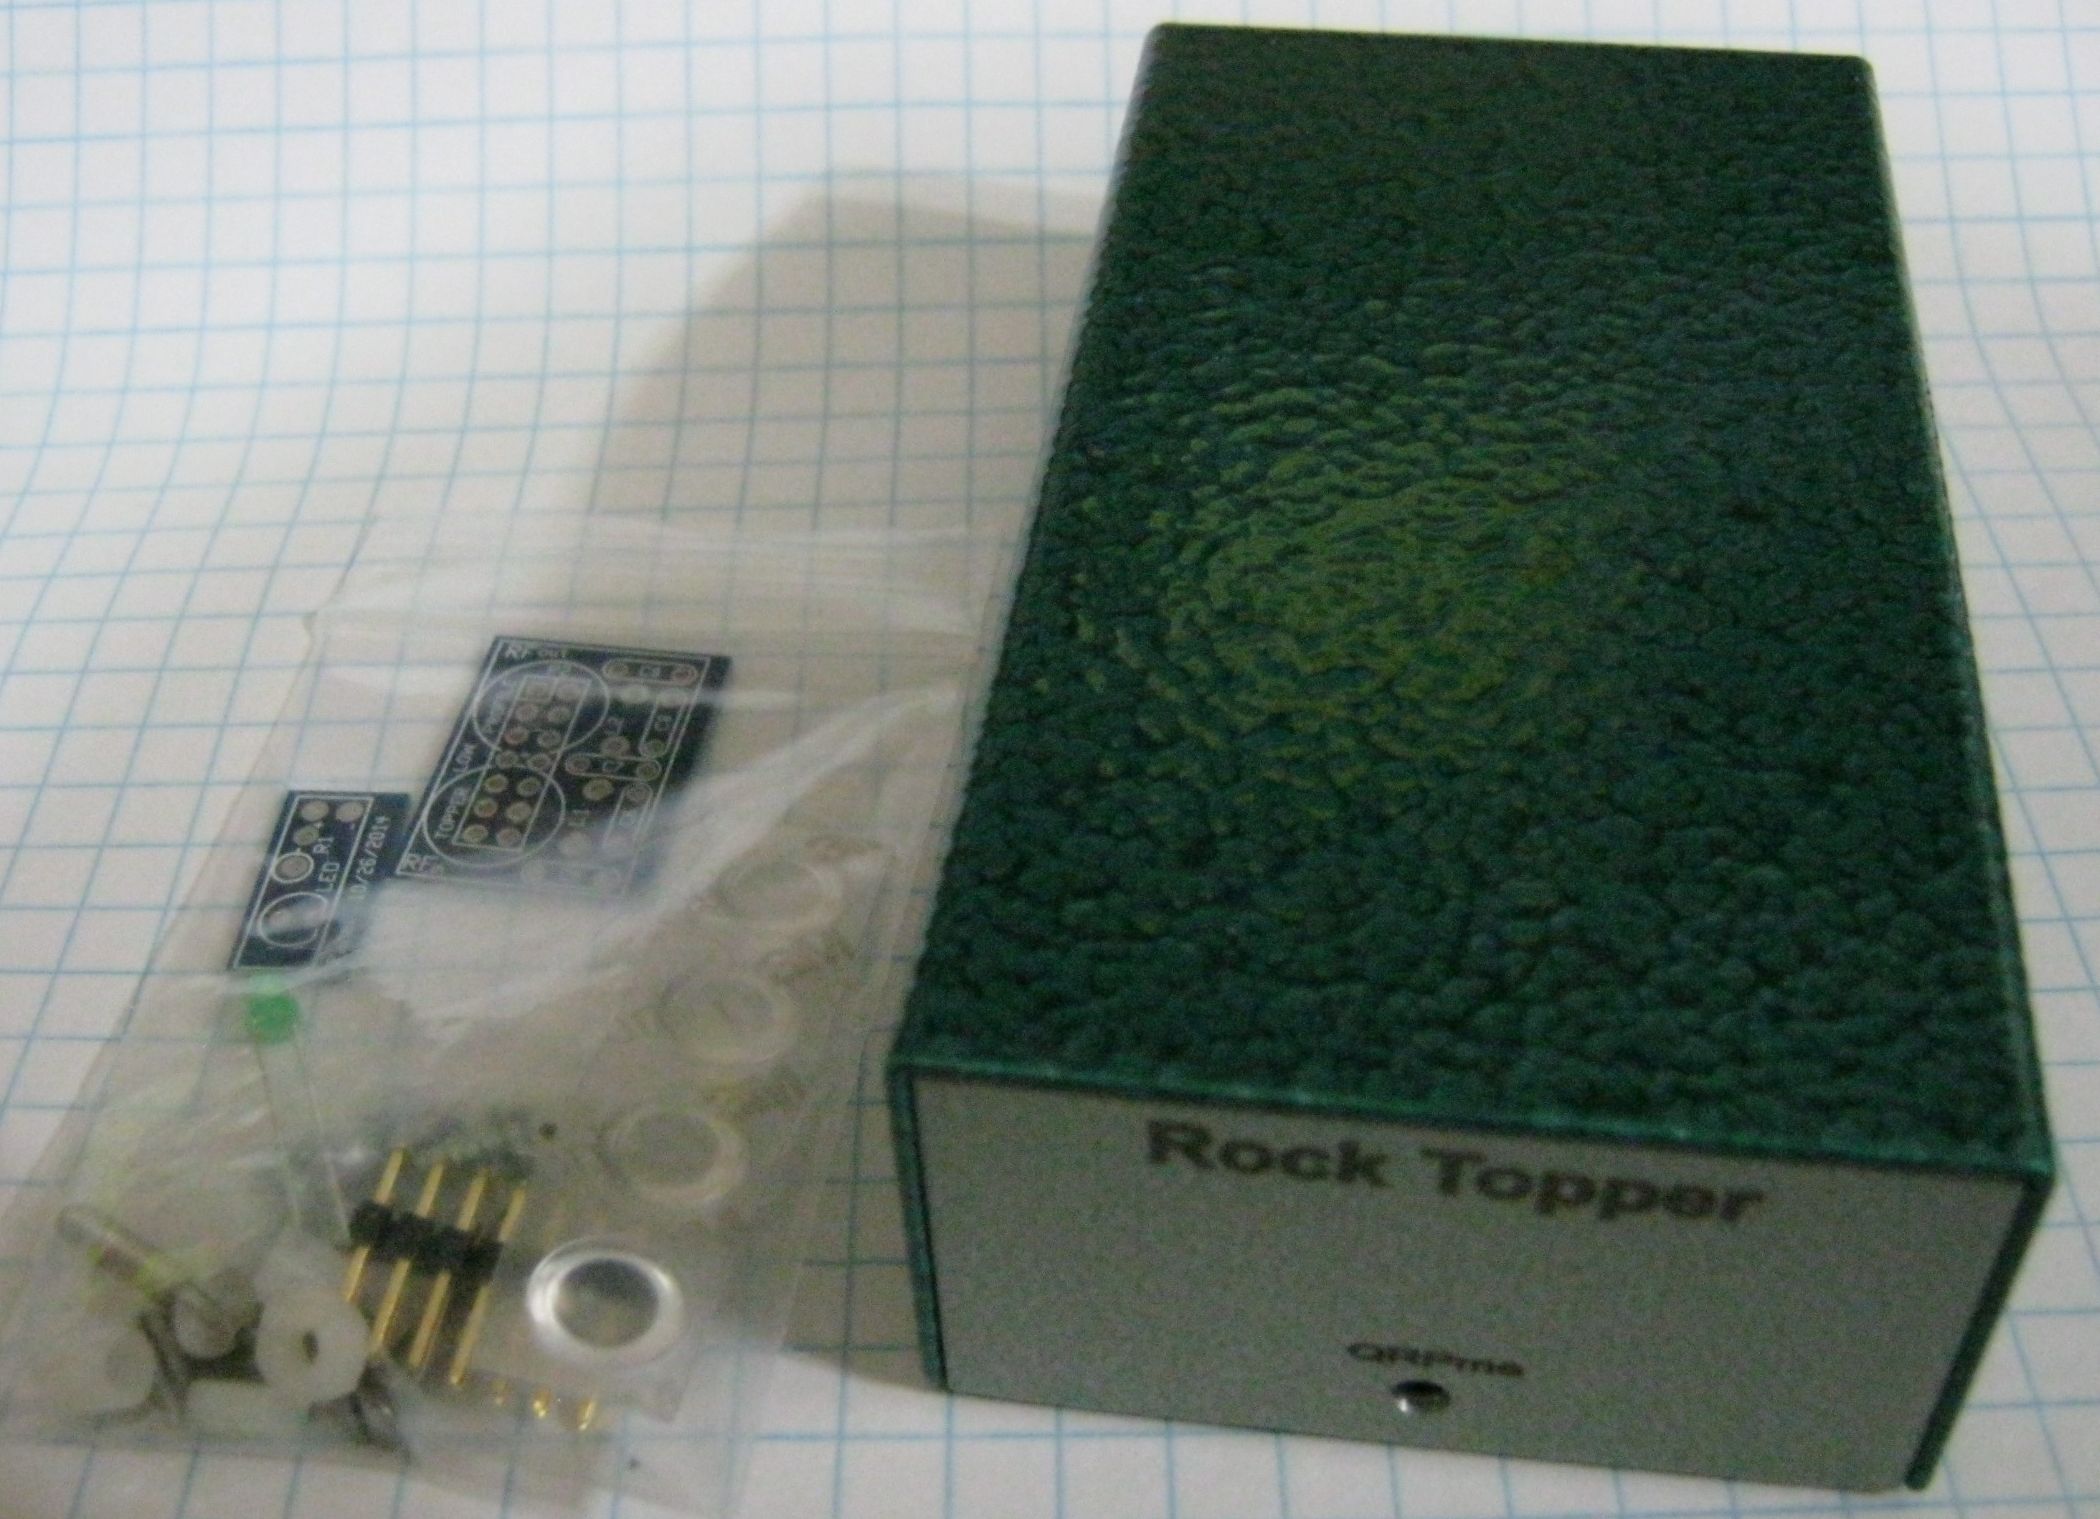 Picture of TEXAS Topper to Rock-Topper Enclosure Upgrade kit